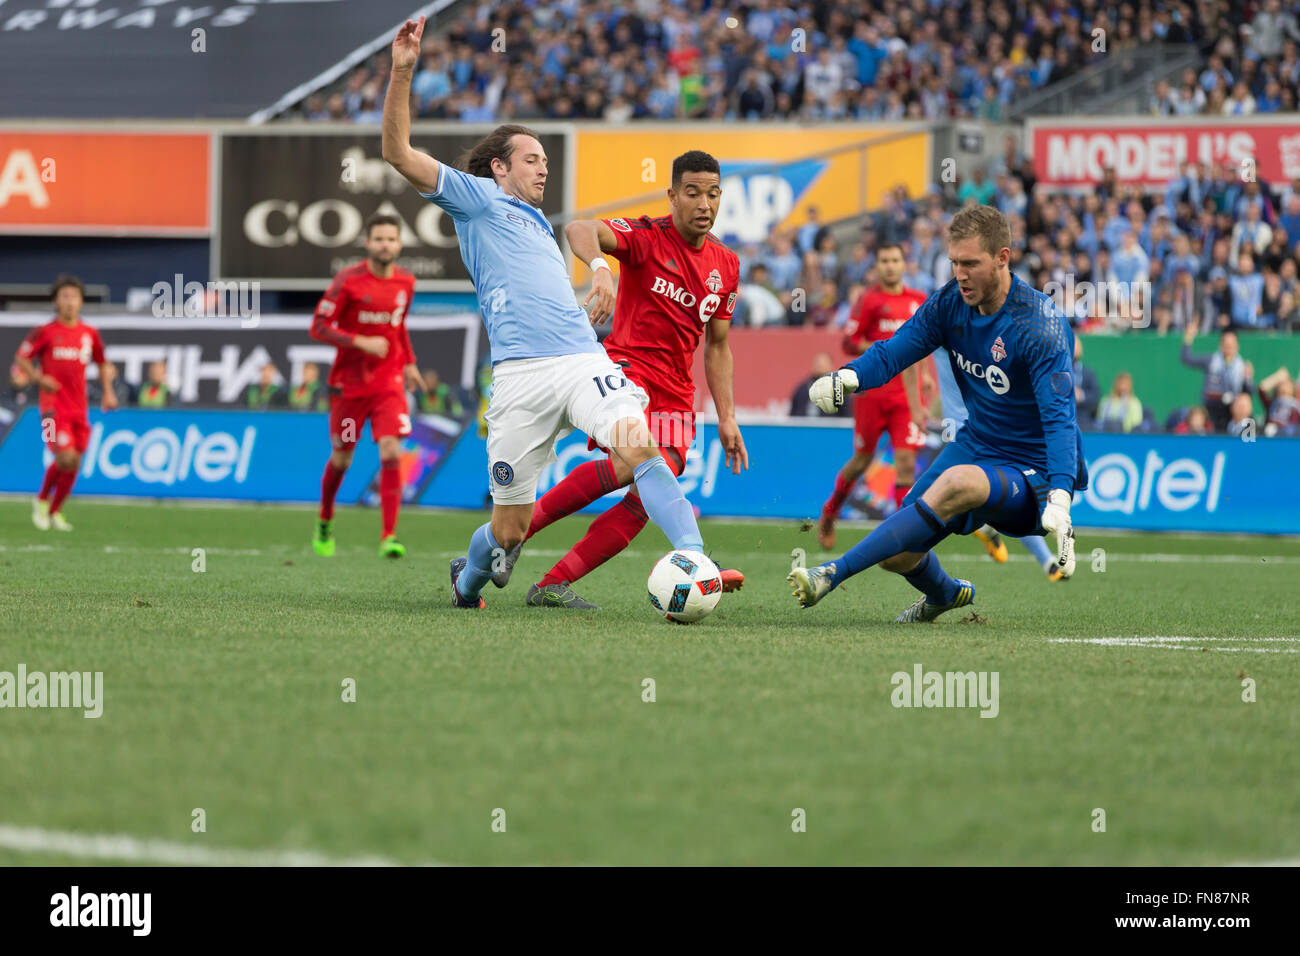 New York, NY USA - March 13, 2016: Mix Diskerud (10) of New York City FC fights for ball during game on Yankee stadium Credit:  lev radin/Alamy Live News Stock Photo